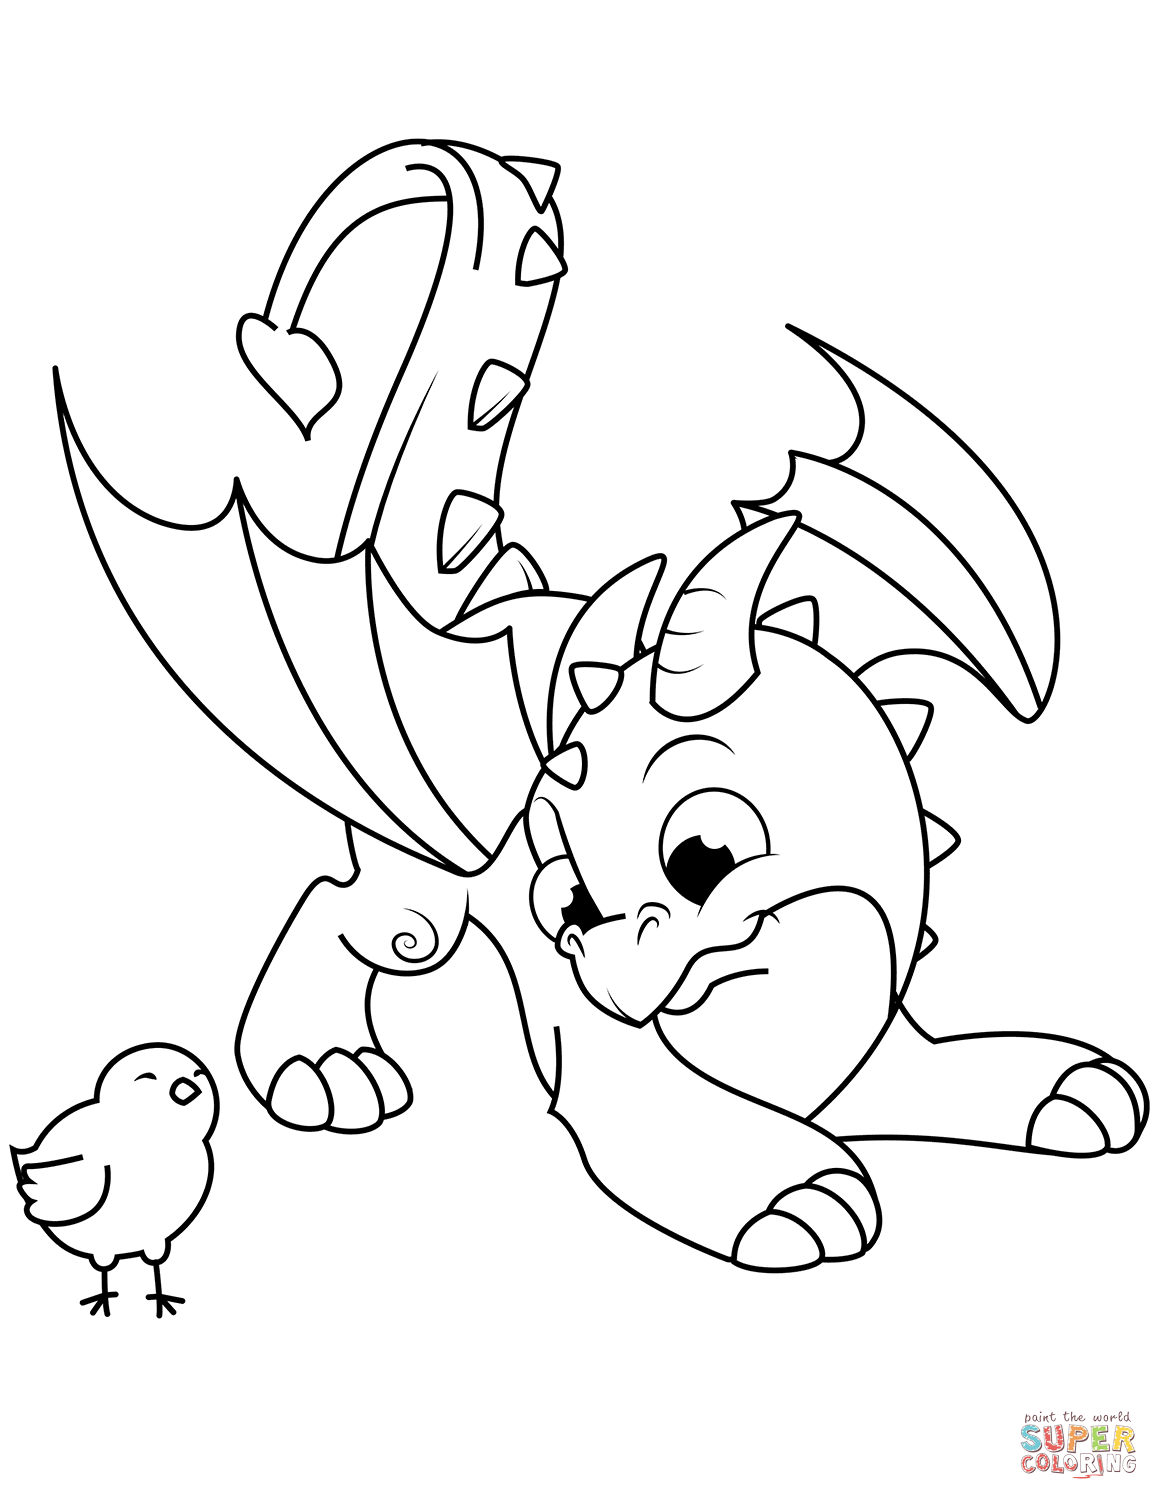 Cute Dragon and Chick coloring page | Free Printable Coloring Pages